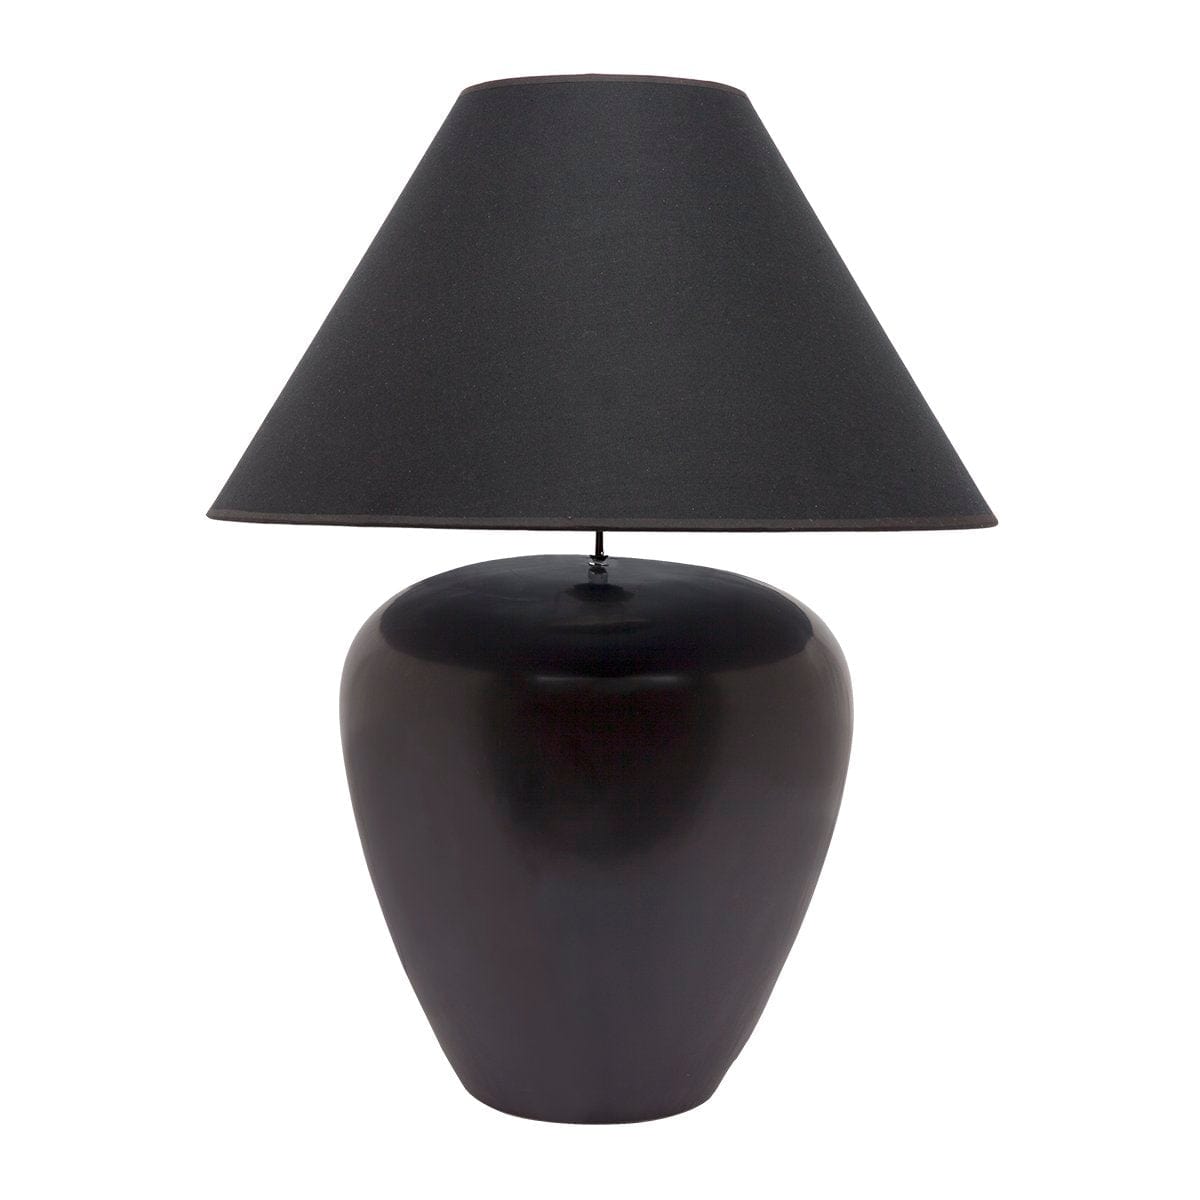 CAFE LIGHTING & LIVING Table Lamp Picasso Table Lamp - Black w Black Shade B13295